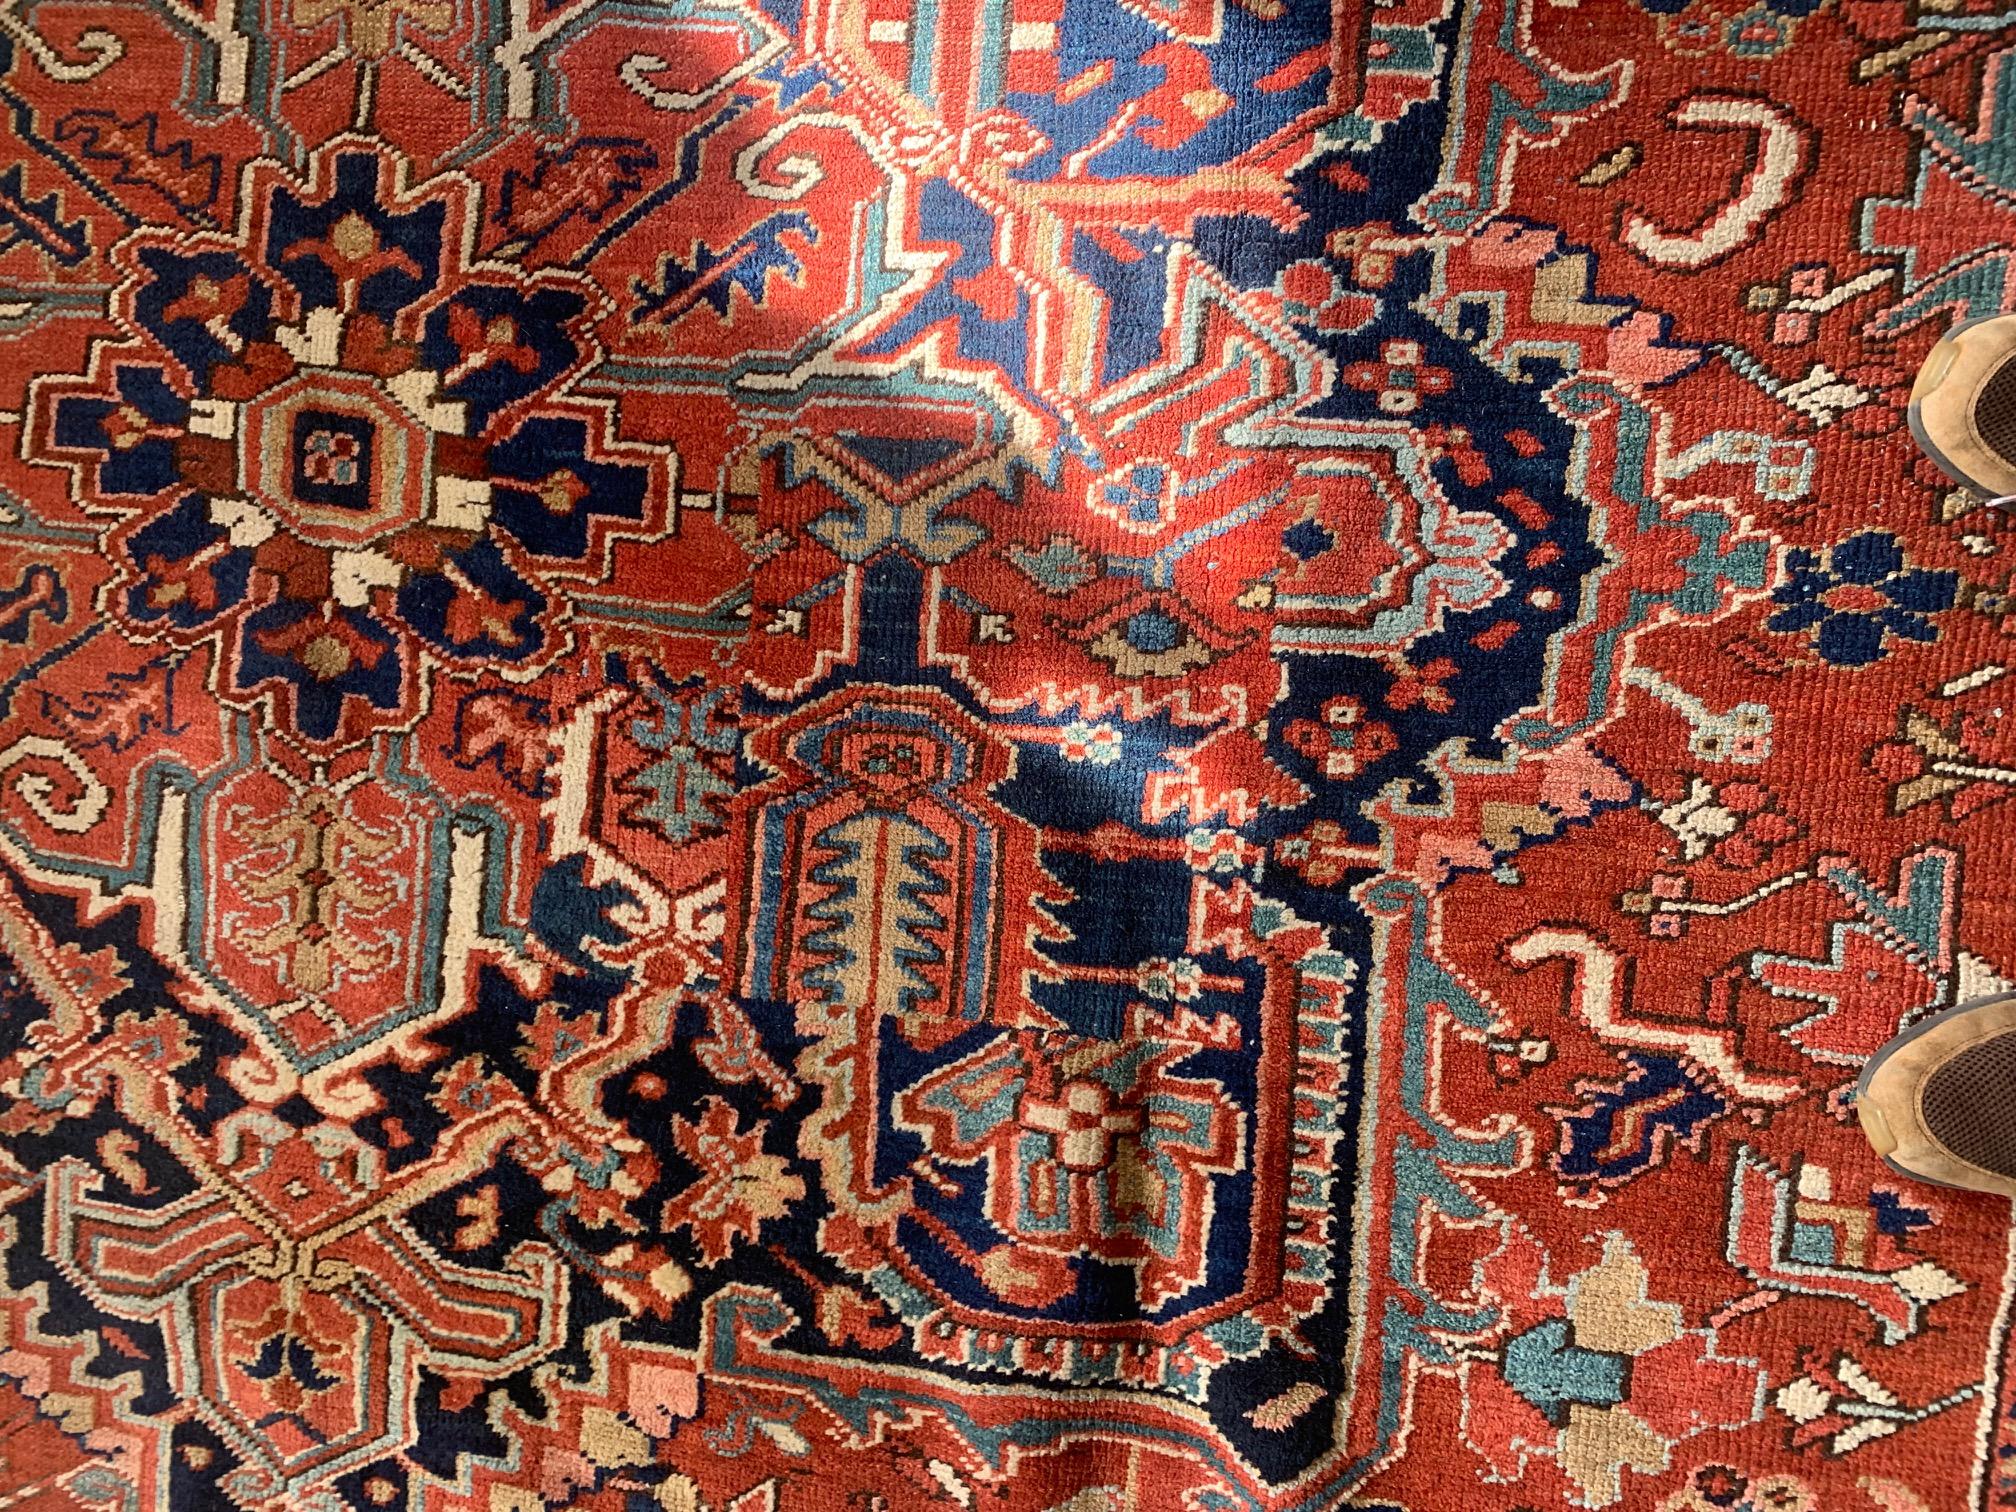 Handmade Antique Persian Style Heriz Rug 9.4' x 12.5', 1900s - 2B031 In Fair Condition For Sale In Bordeaux, FR